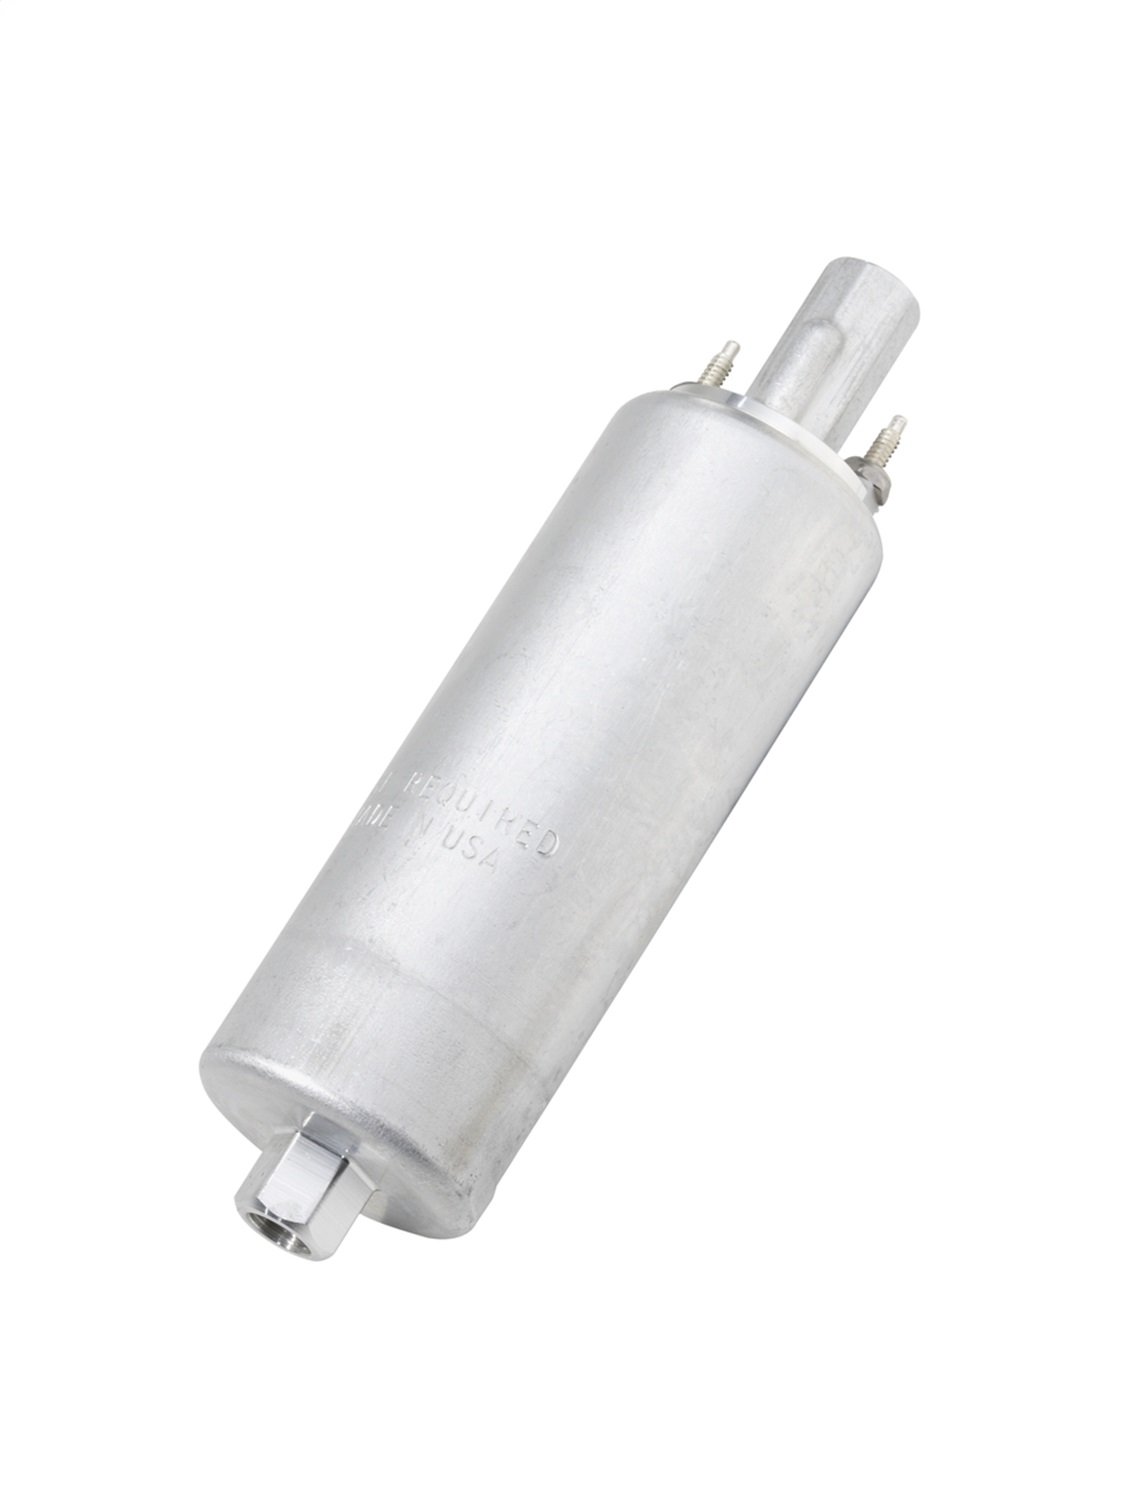 In-Line Universal Electric Fuel Pump - 12-930